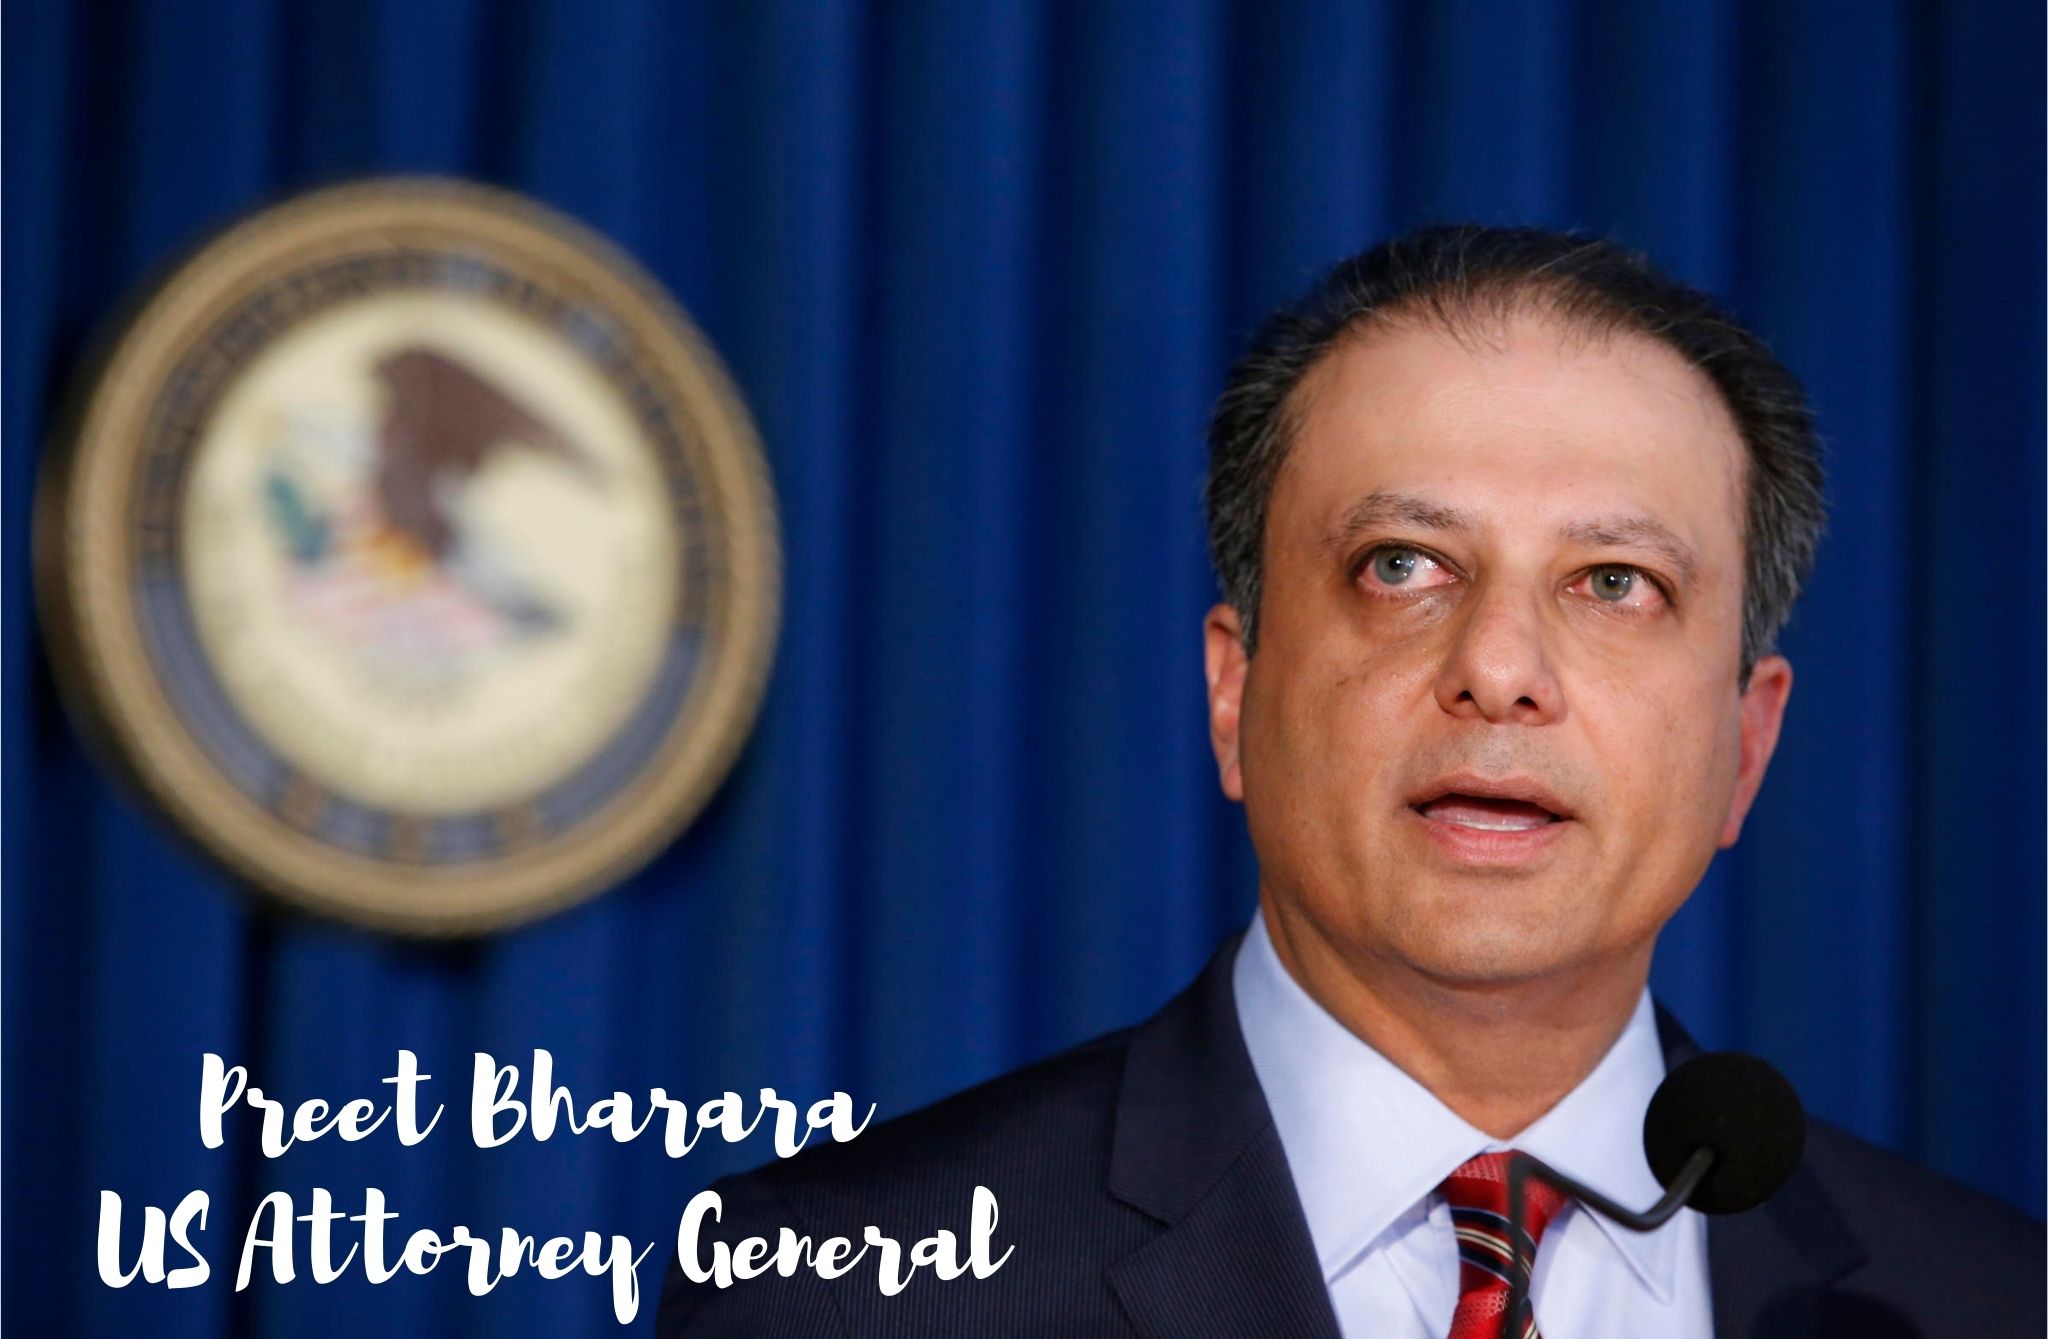 Preet Bharara: An Intricate Exploration of His Stint as US Attorney General